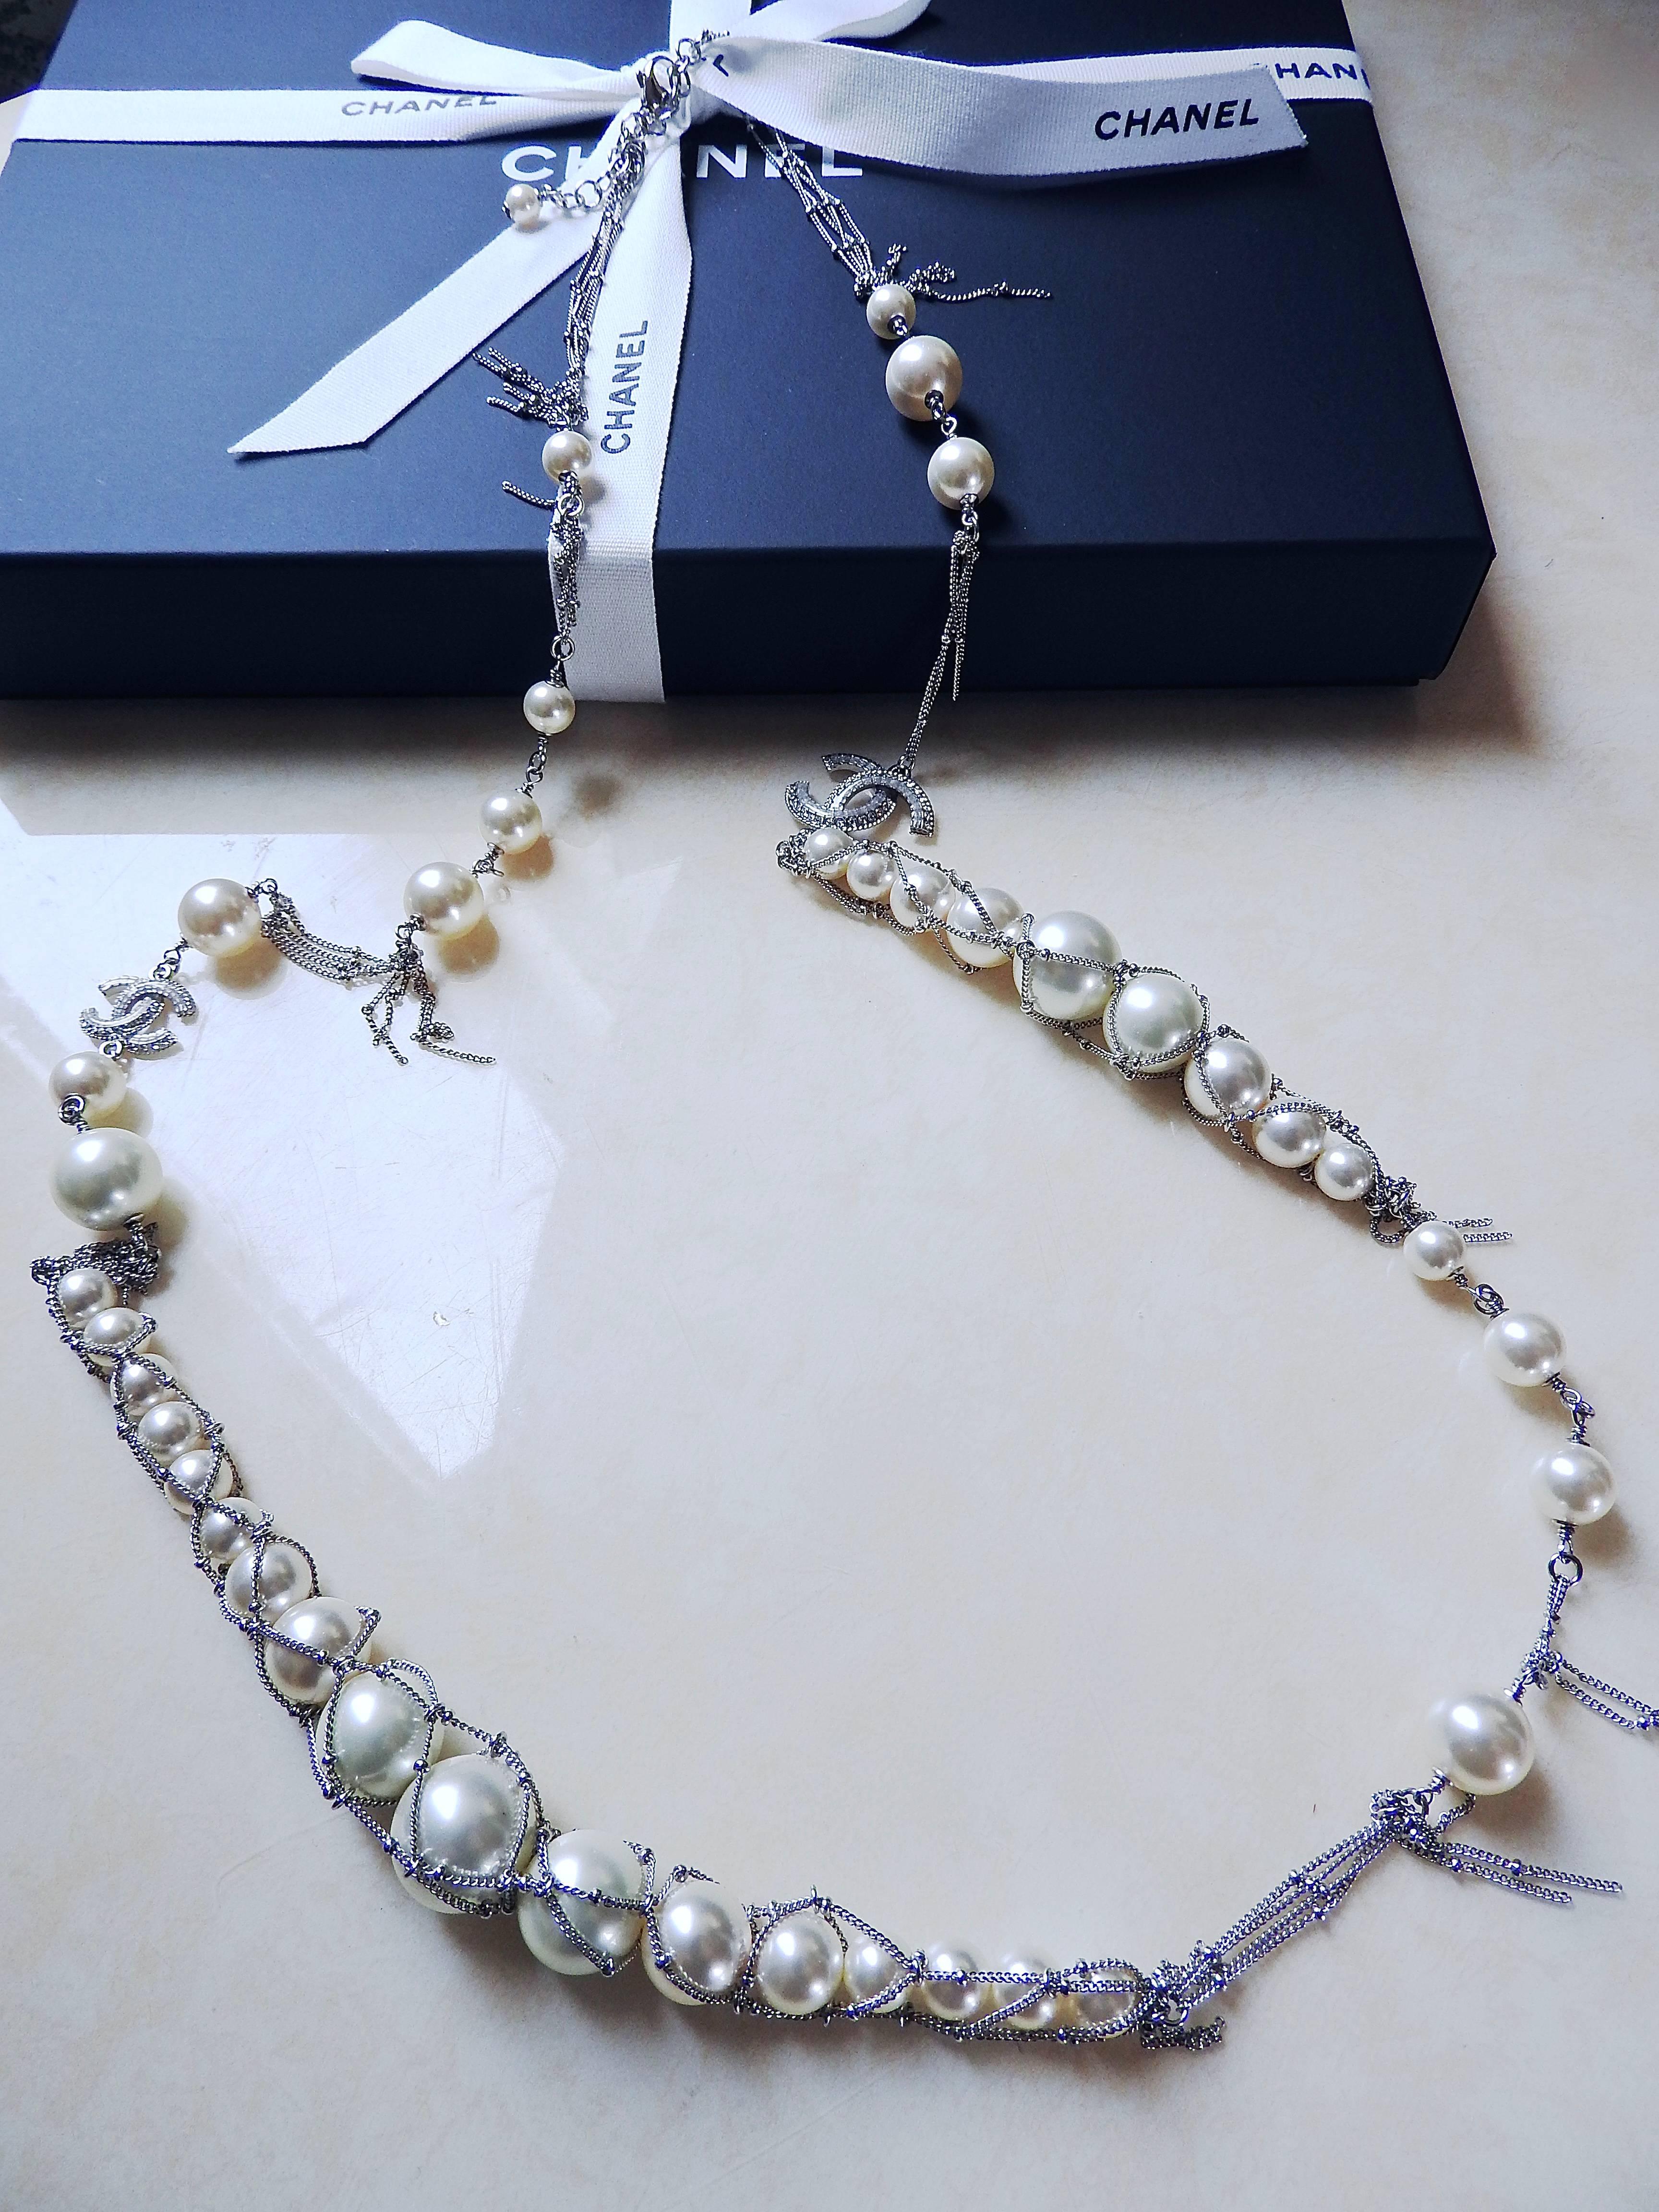 This gorgeous and sweet long fishnet pearl necklace is from Chanel supermarket grocery series. 
Designer using fishnet to present joy of harvesting sea pearls.  The whole piece is done in an asymmetric and free style with such much exquisite and